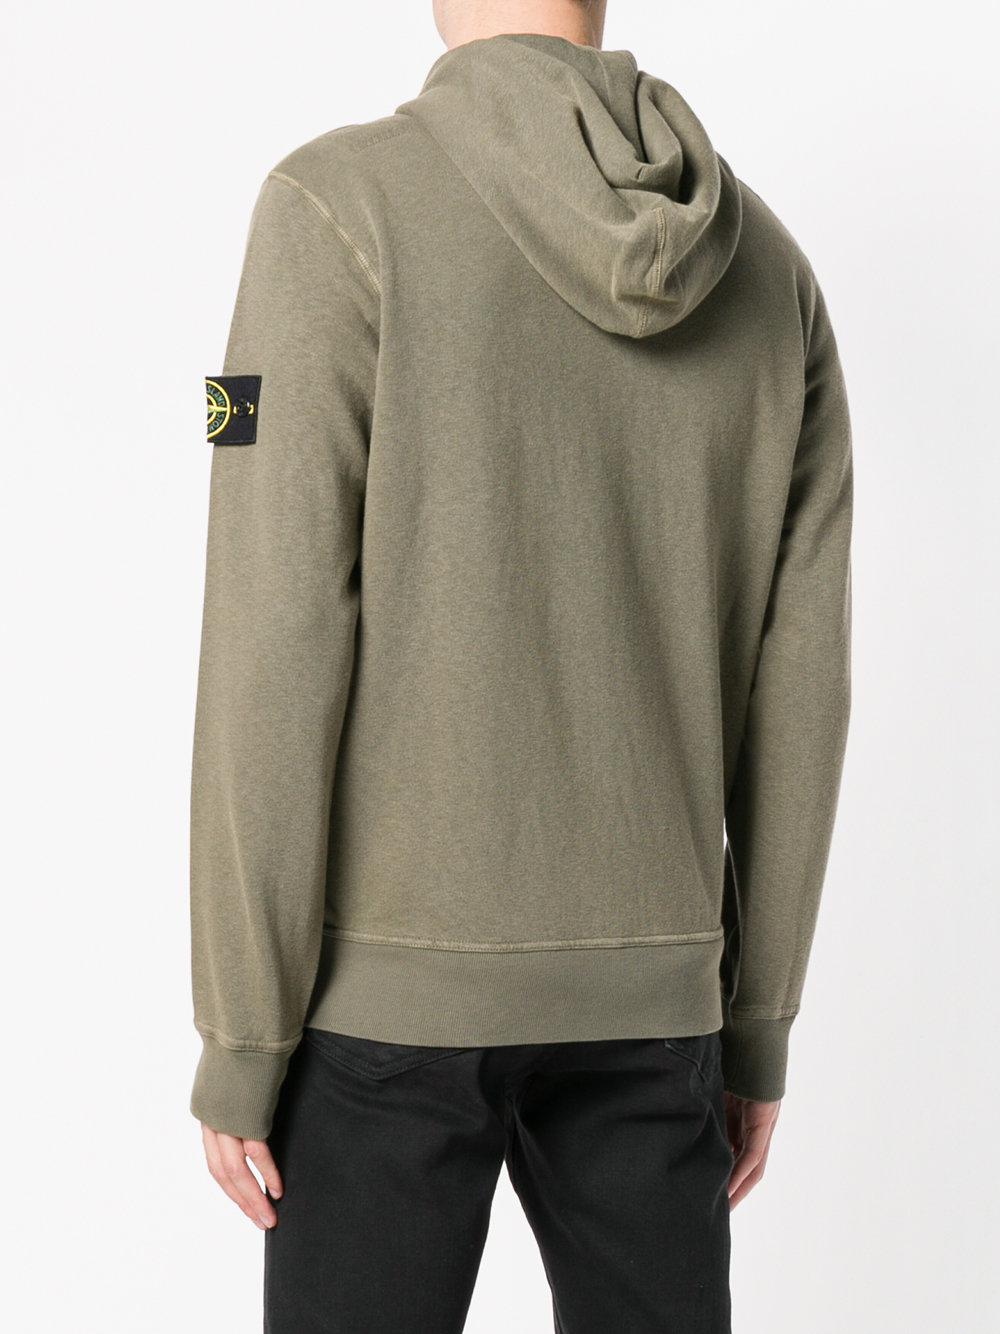 Stone Island Zipped Hoodie in Green for Men - Lyst